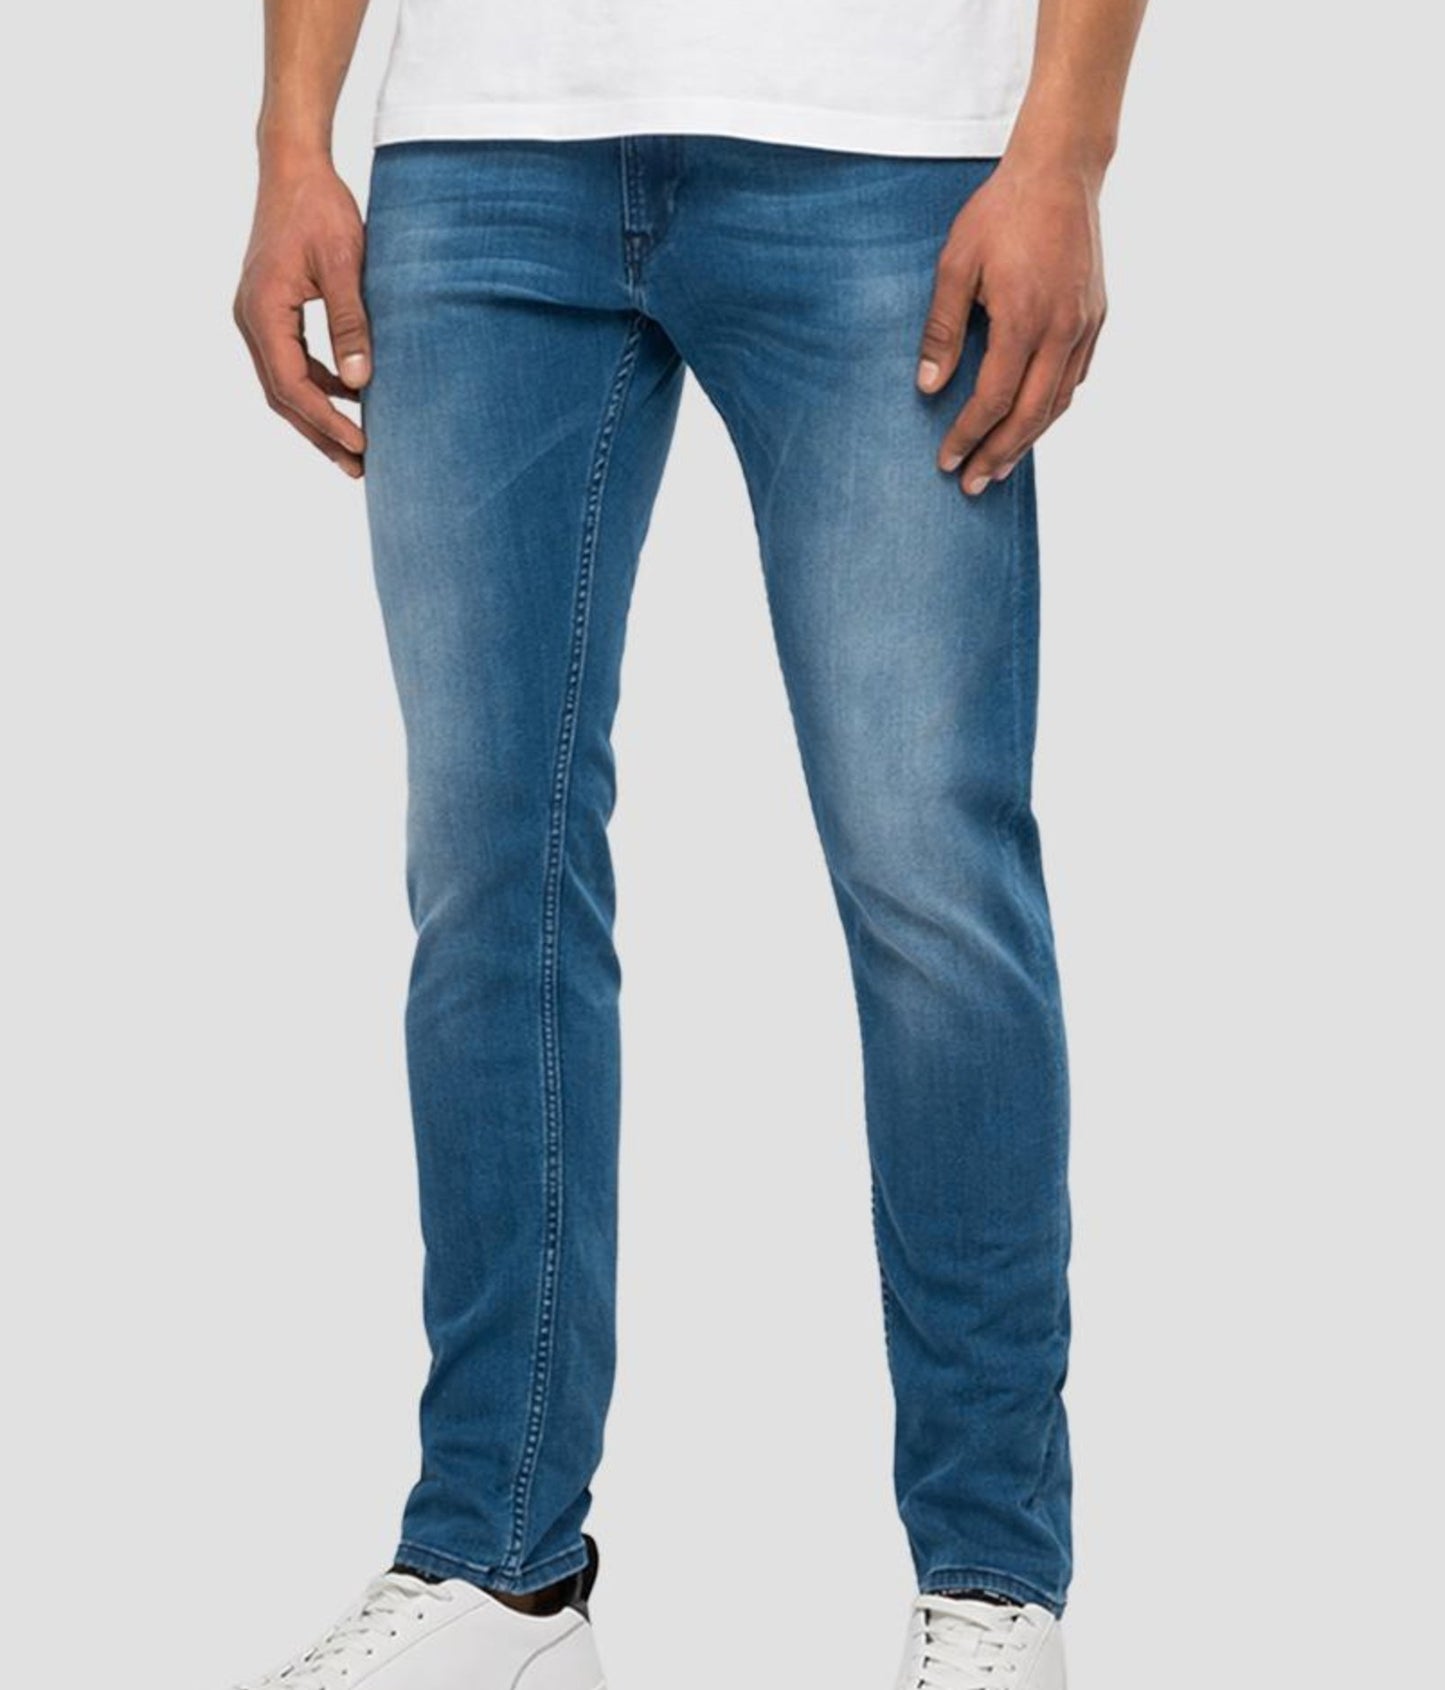 Replay Skinny Fit Jondrill Jeans - Blue - GLS Clothing